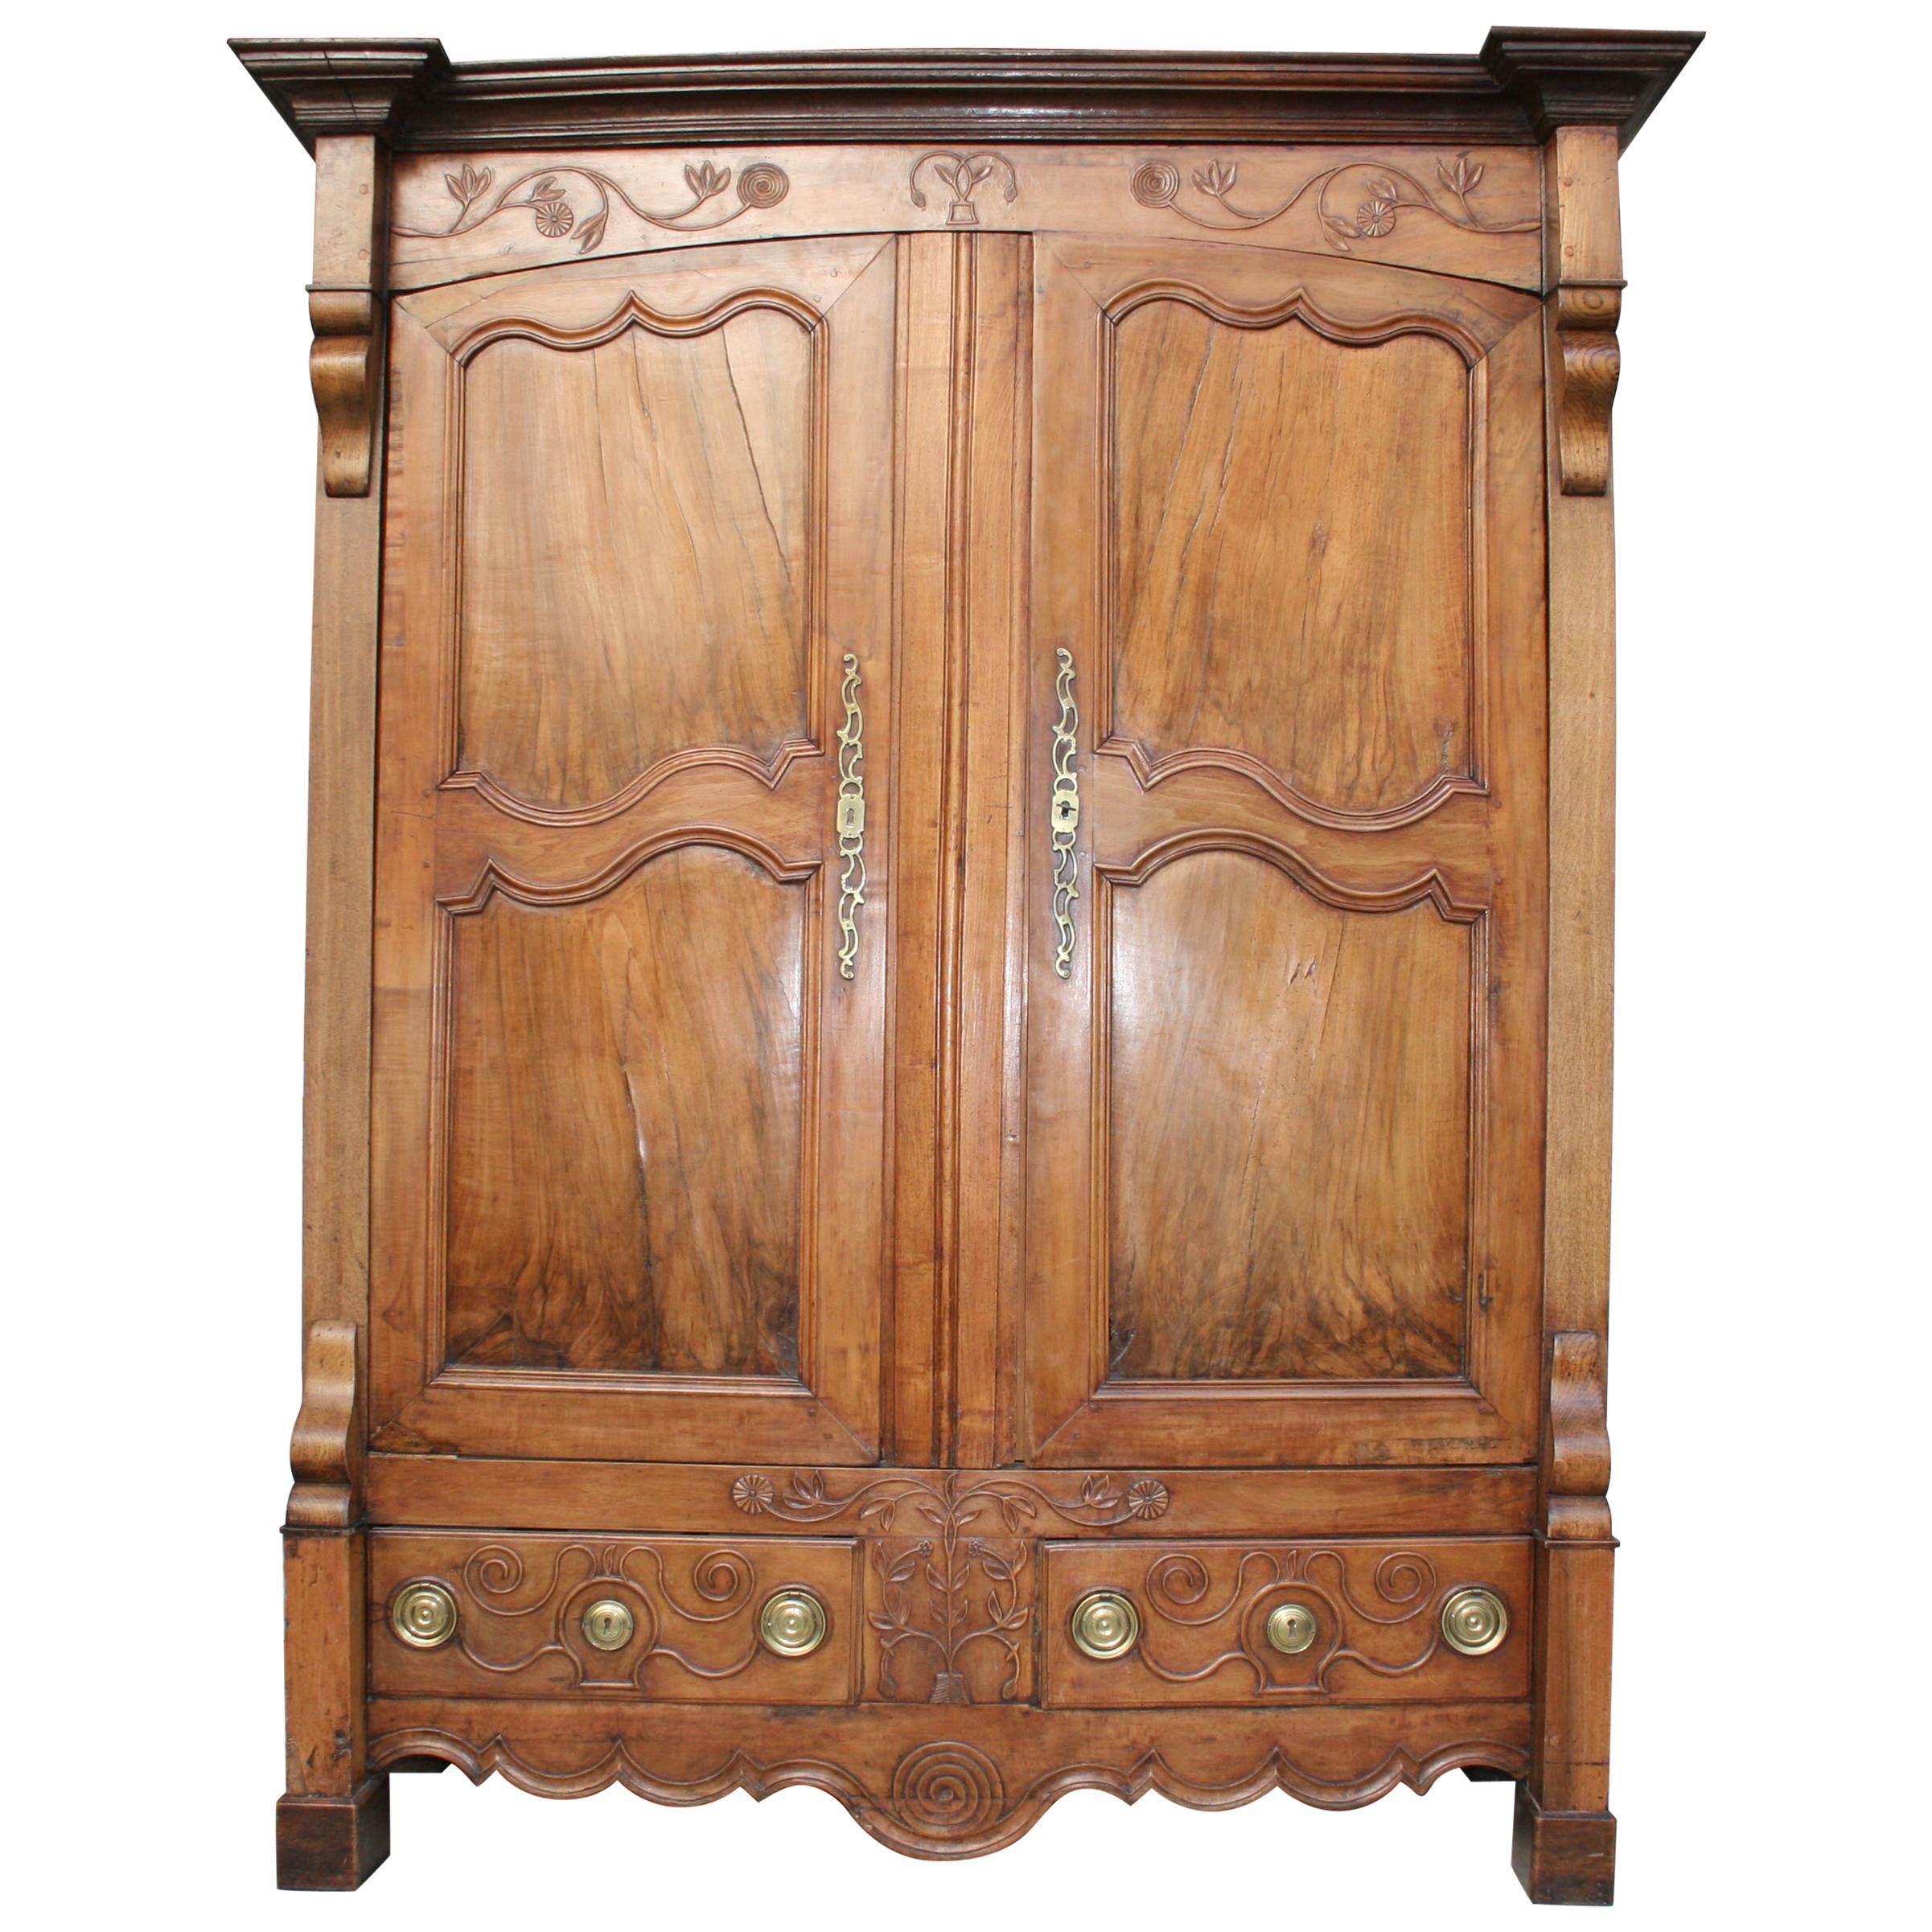 18th Century French Cabinet Made of Walnut and Oak